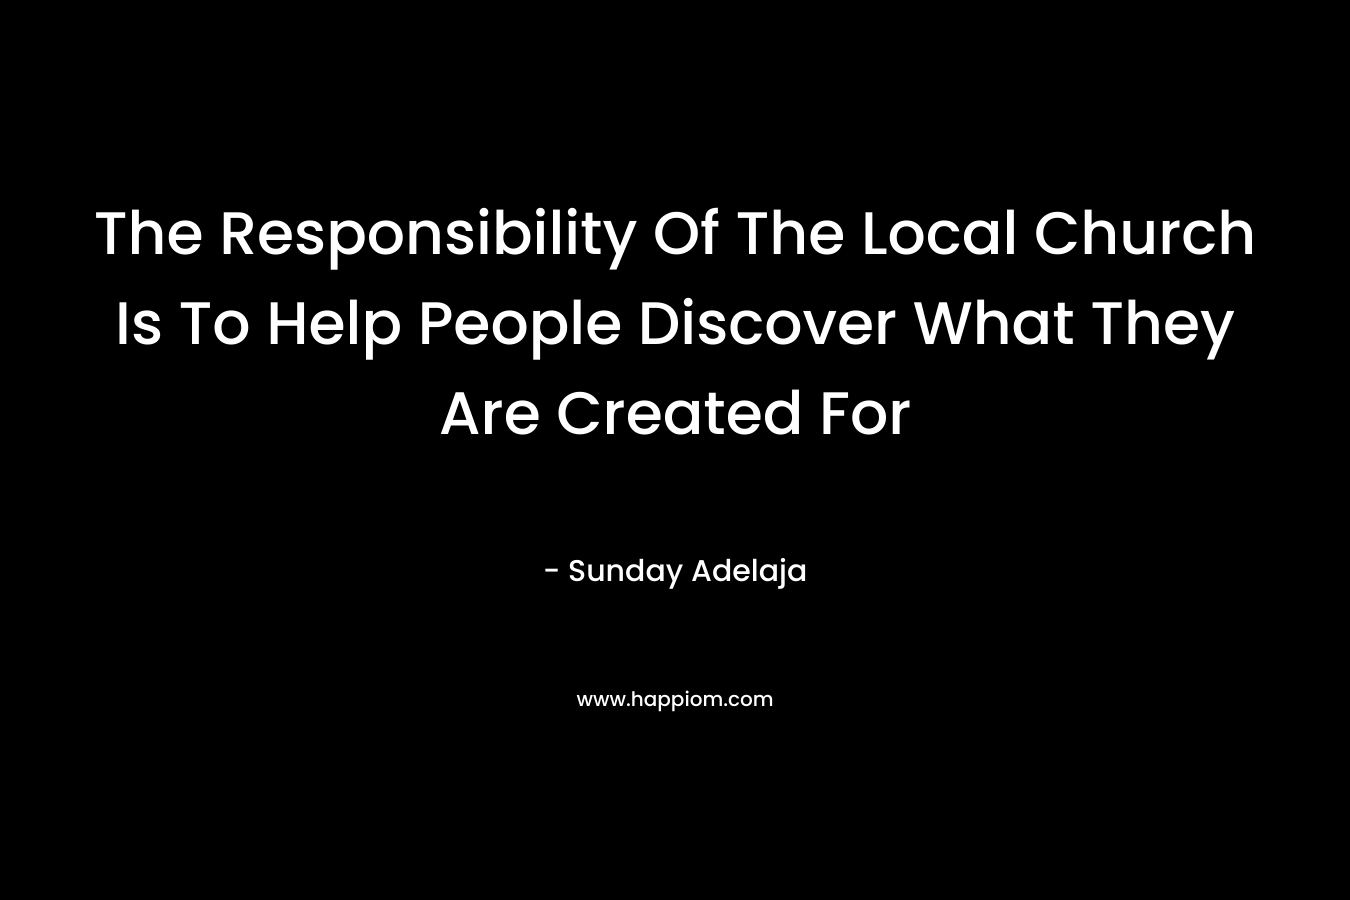 The Responsibility Of The Local Church Is To Help People Discover What They Are Created For